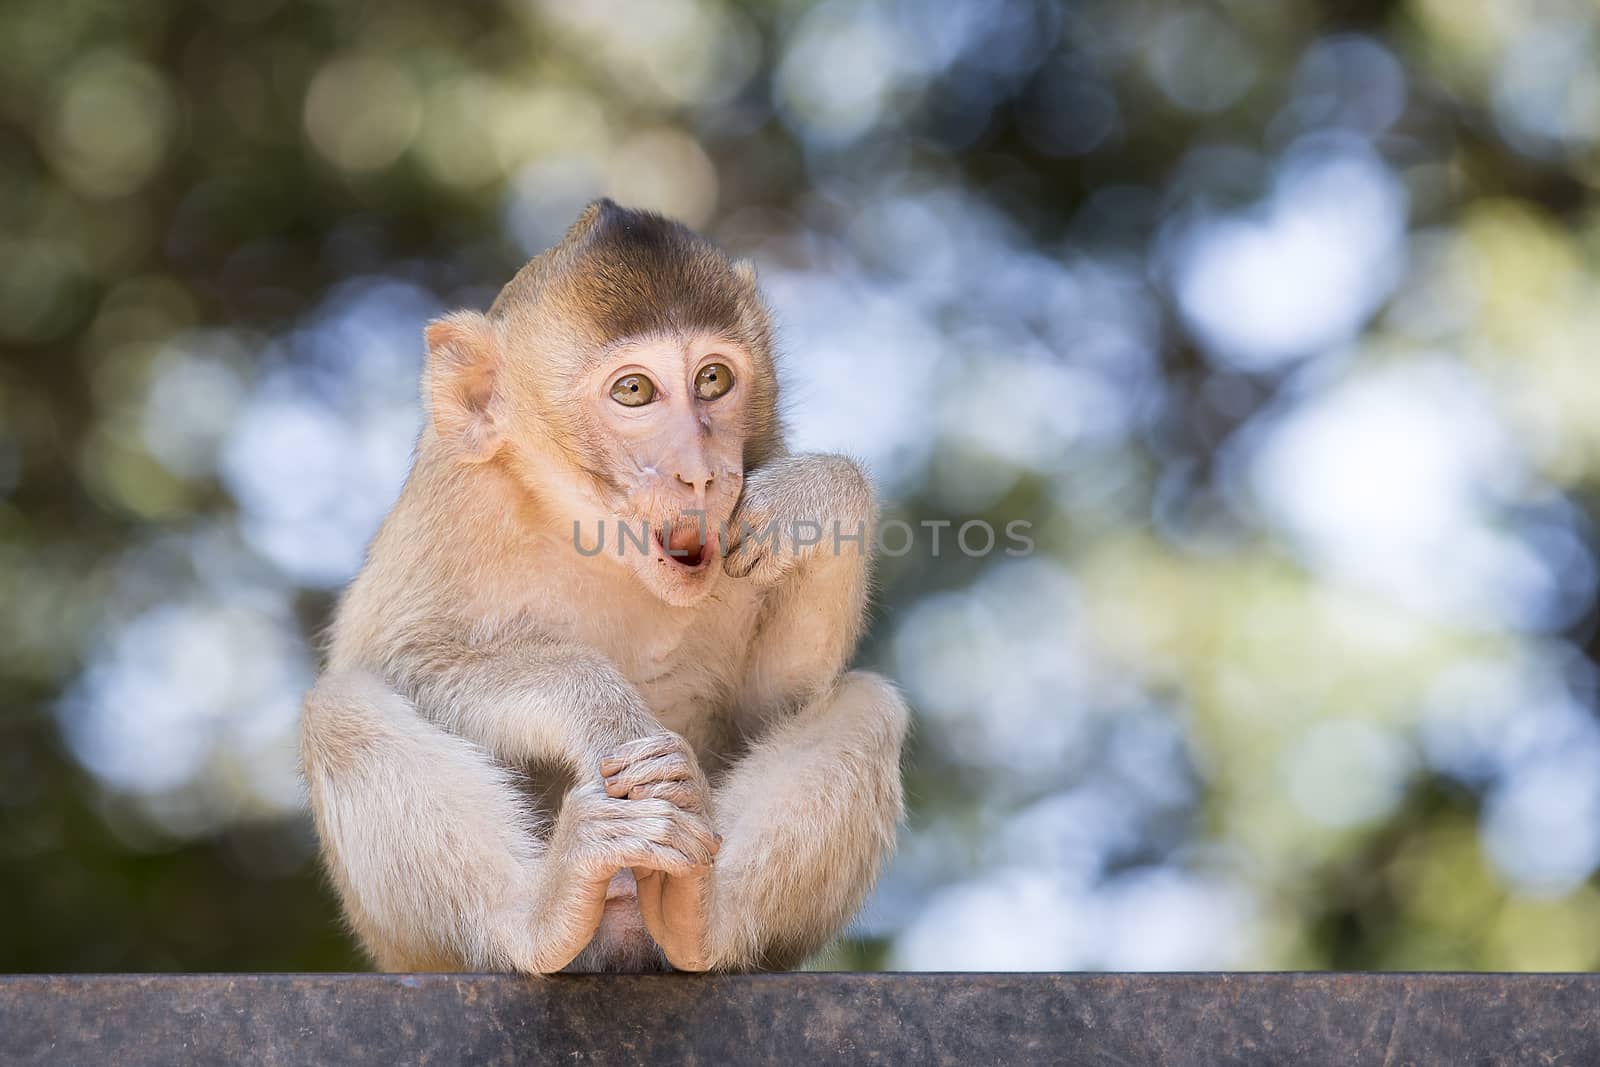 Portrait of a monkey in wildlife. Great Detail on his face expression